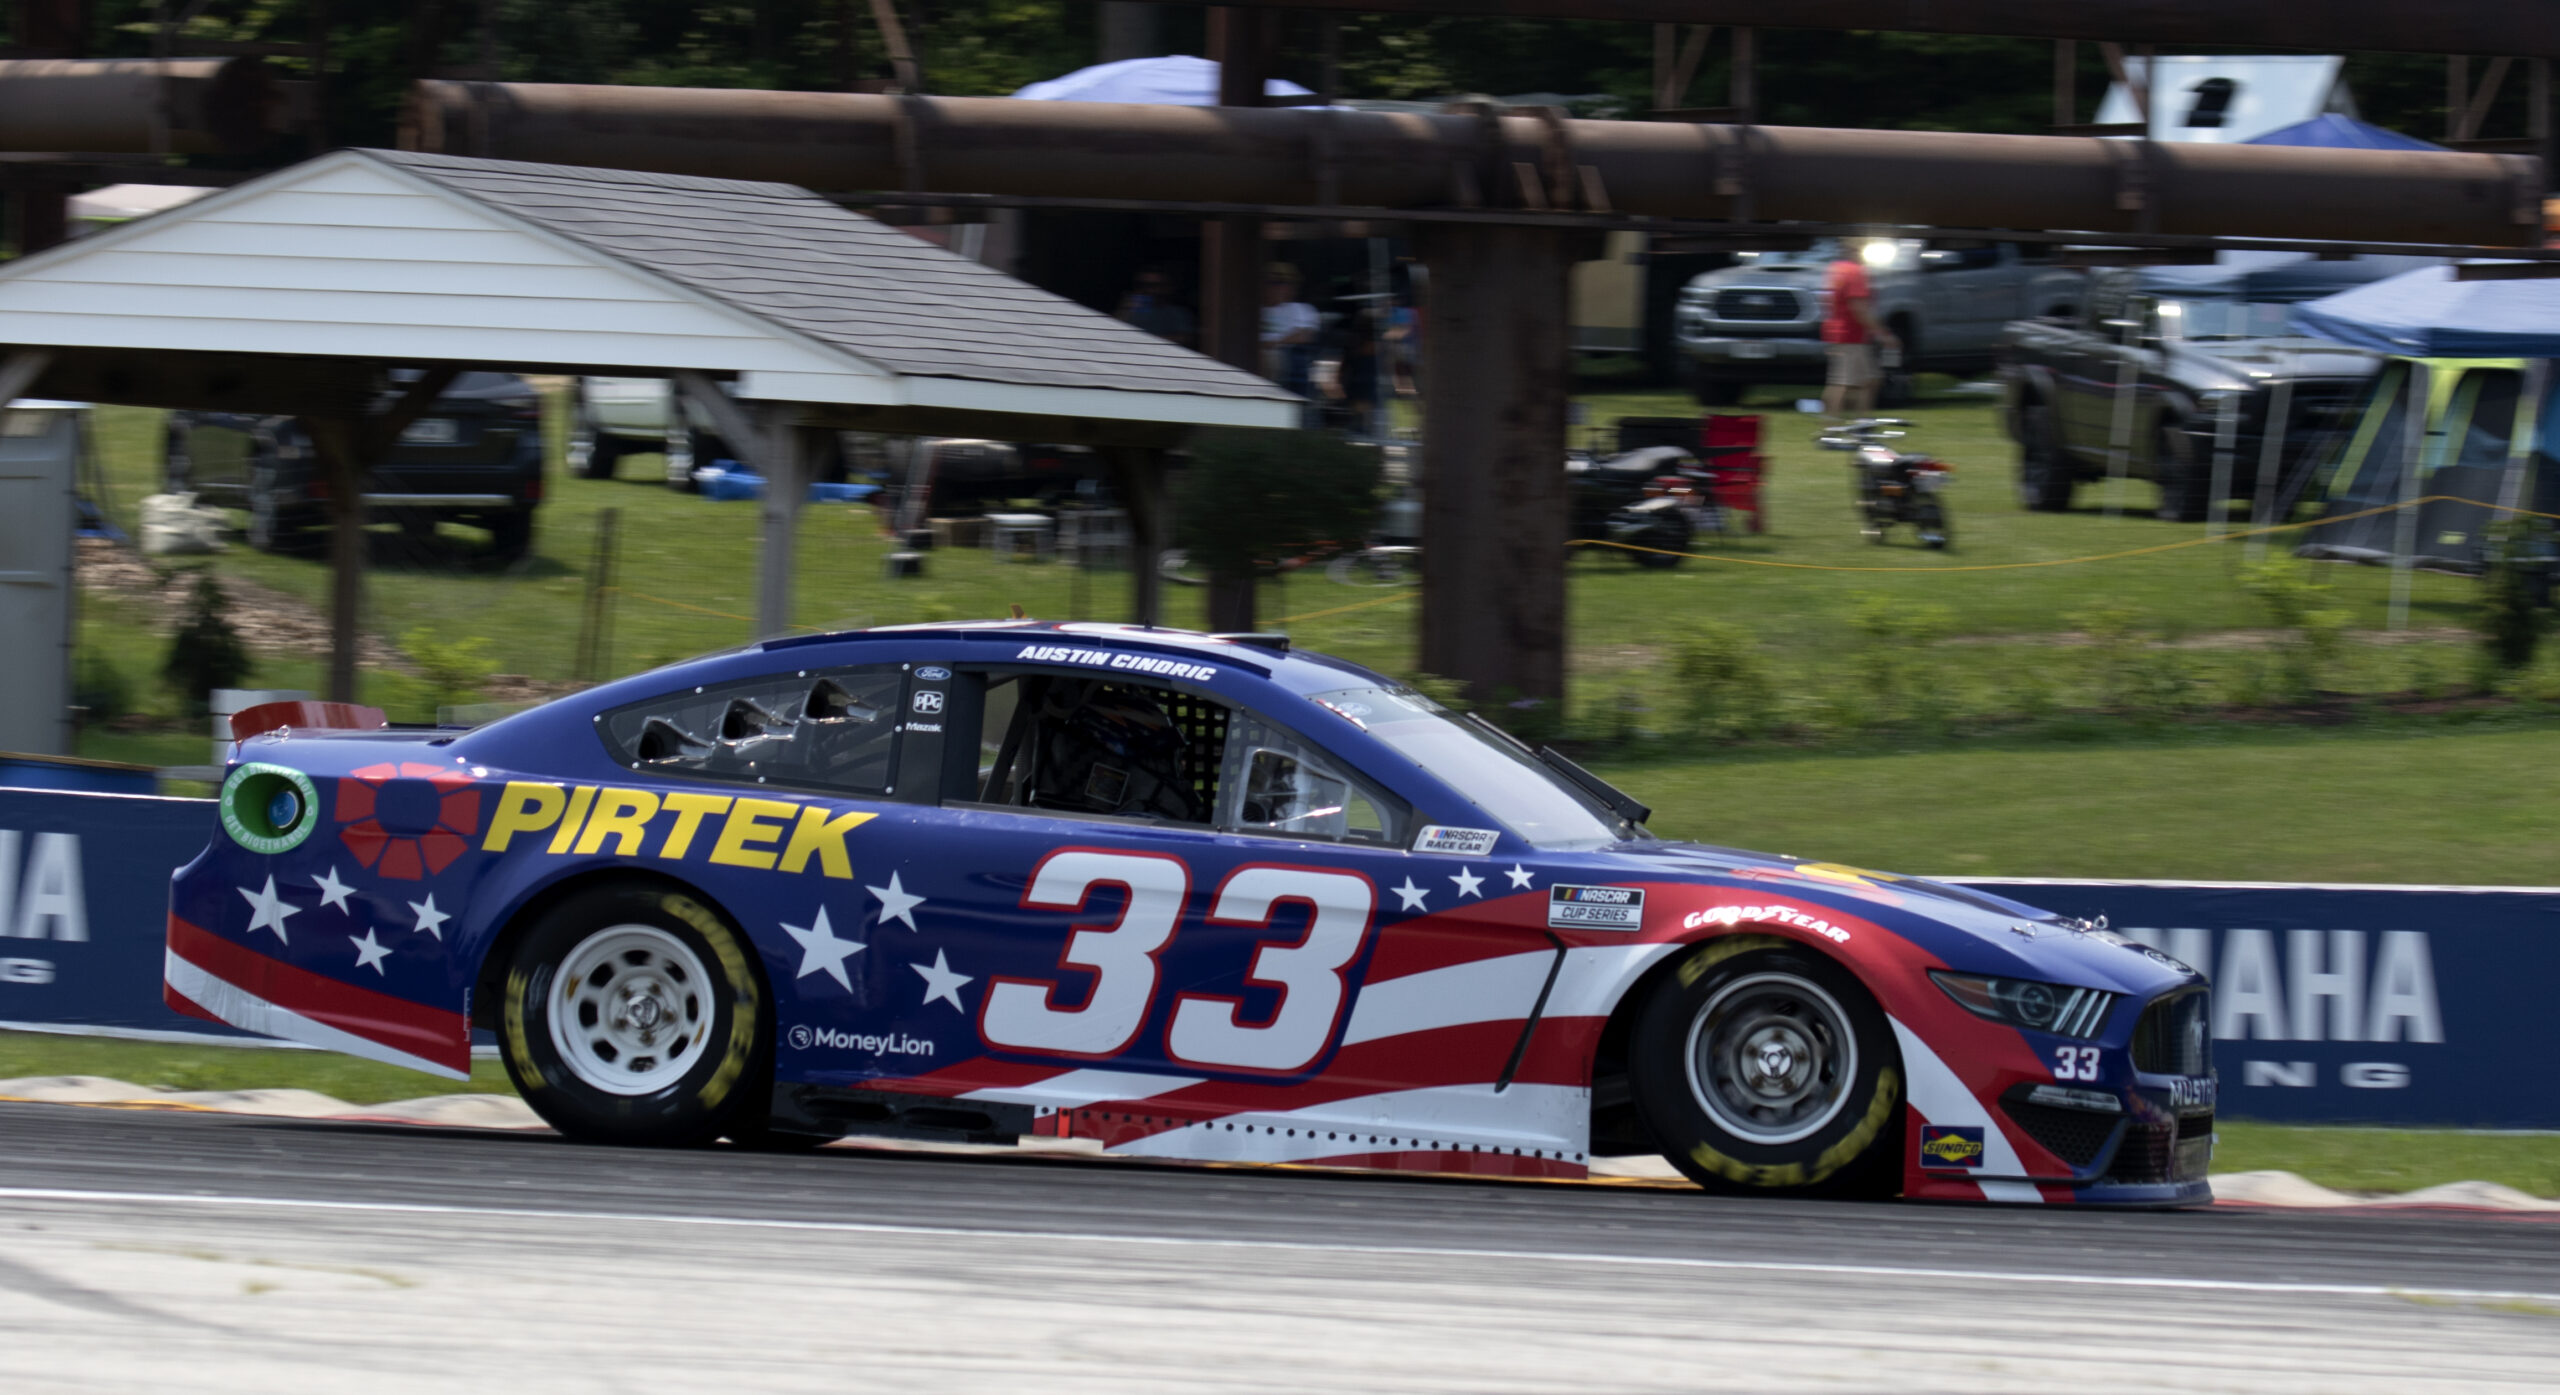 Certainly, Austin Cindric's No. 33 shows patriotic colors for Sunday's Jockey Made In America 250 at Road America. (Photo: Mike Moore/The Podium Finish)